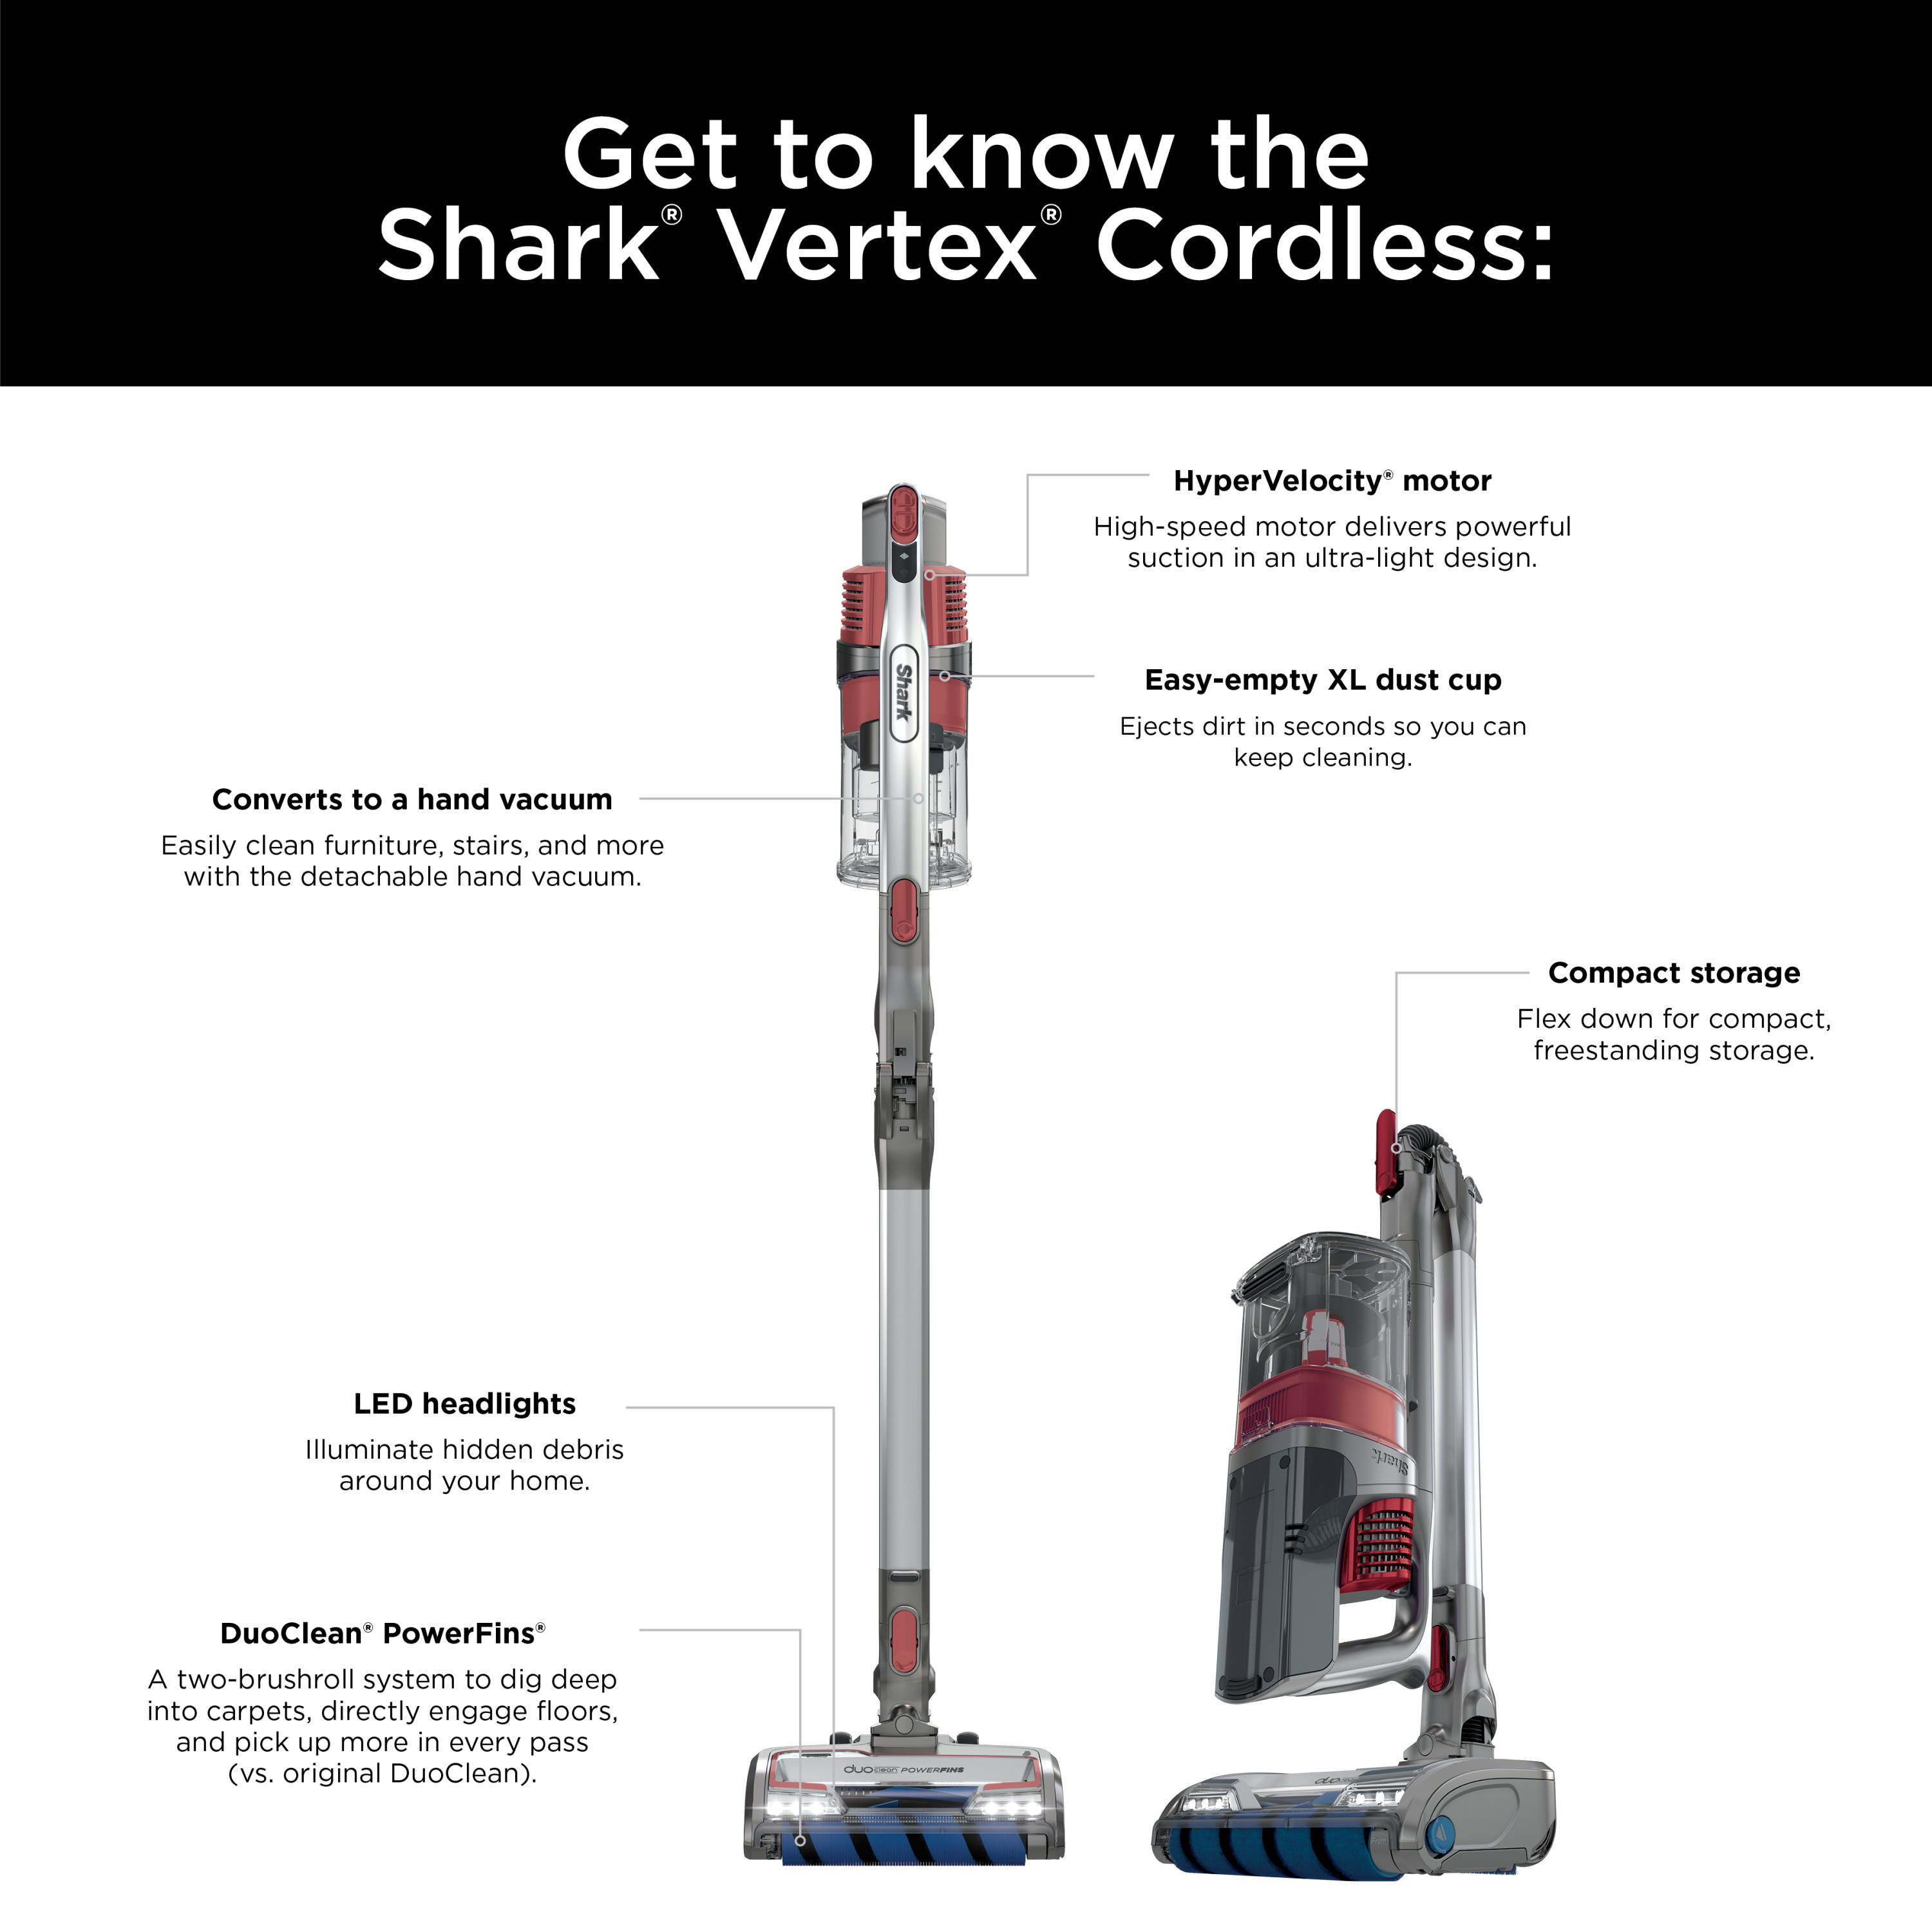 Shark Vertex Cordless Stick Vacuum Cleaner with DuoClean Power Fins, WZ440H - image 3 of 9